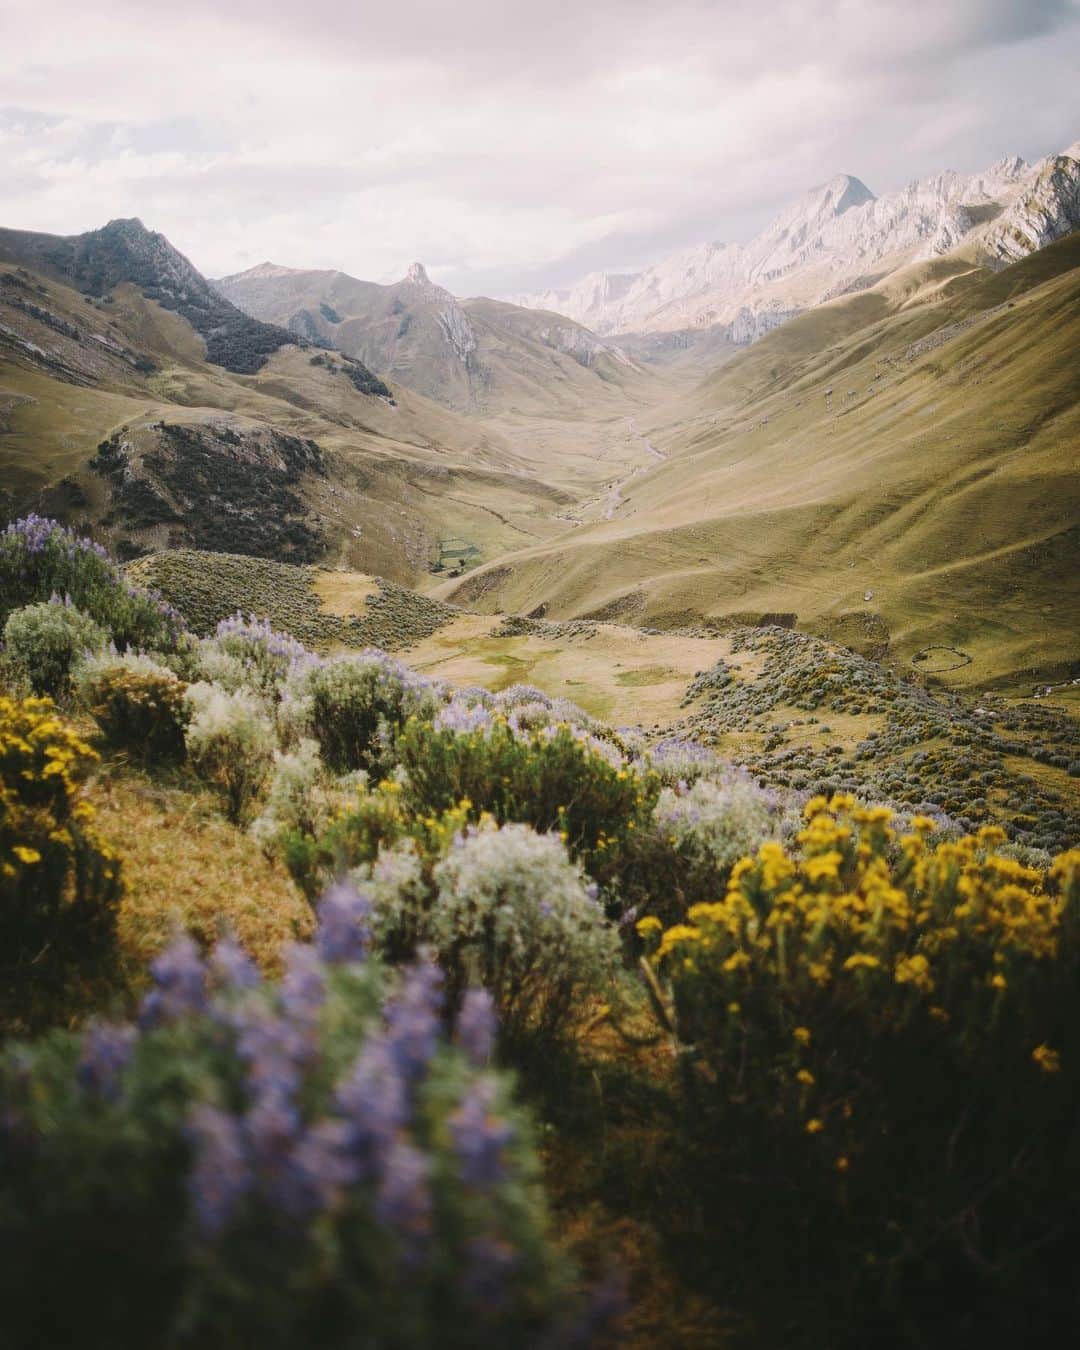 Alex Strohlのインスタグラム：「Landscapes of the Peruvian Andes 1/2  I remember being so drawn towards the vegetation of this part of the world. Every bush and every flower became a dream foreground for a photo. I don’t think I’ve ever shot so many bushes in a row!  Here are some of my favorites」